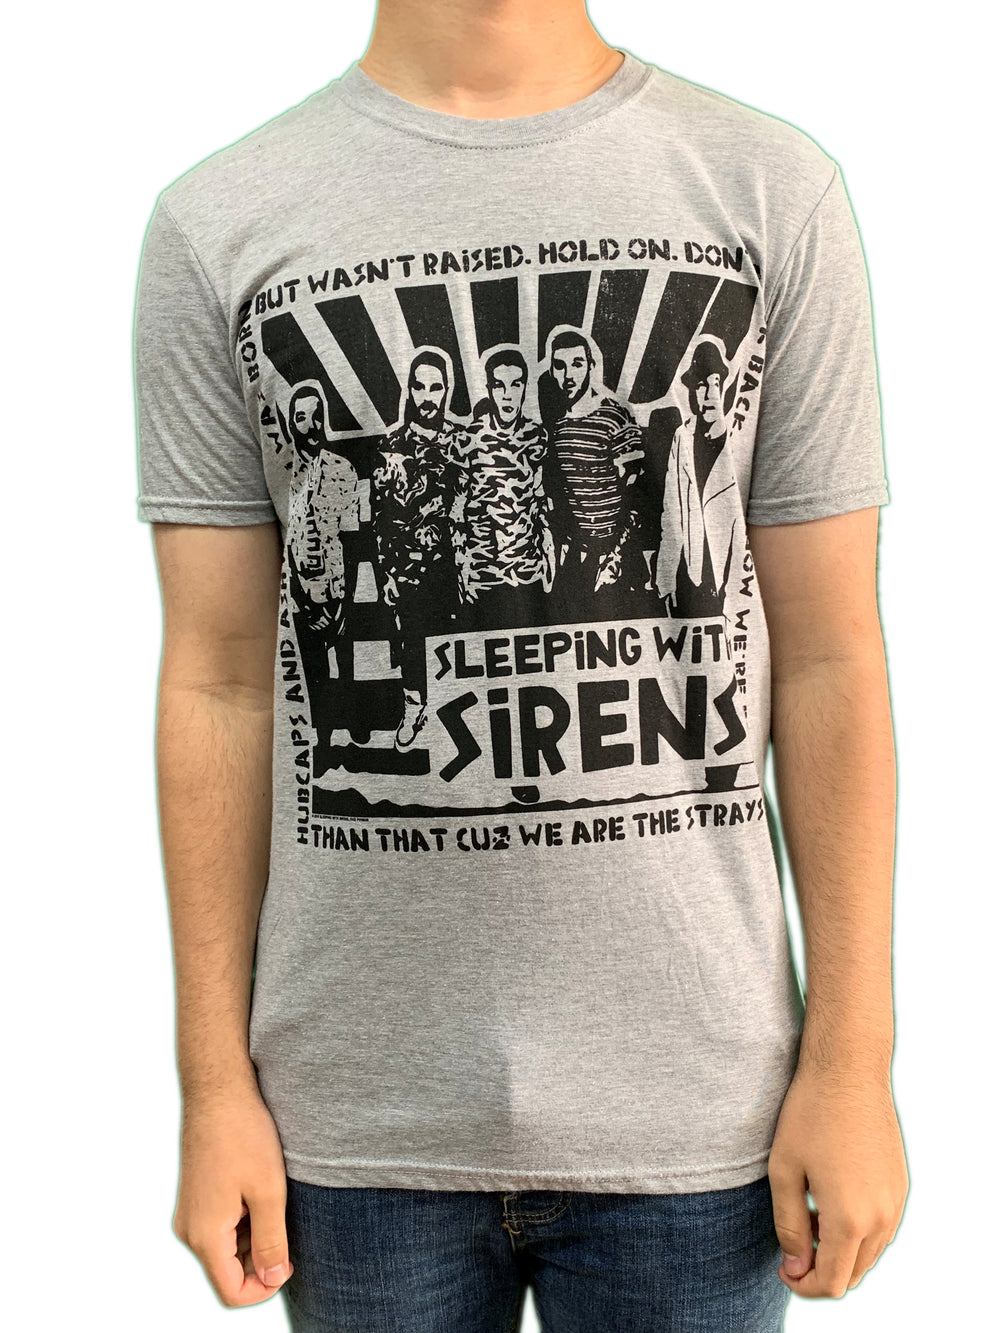 Sleeping With Sirens Clipping Unisex Official Tee Shirt Brand New Various Sizes